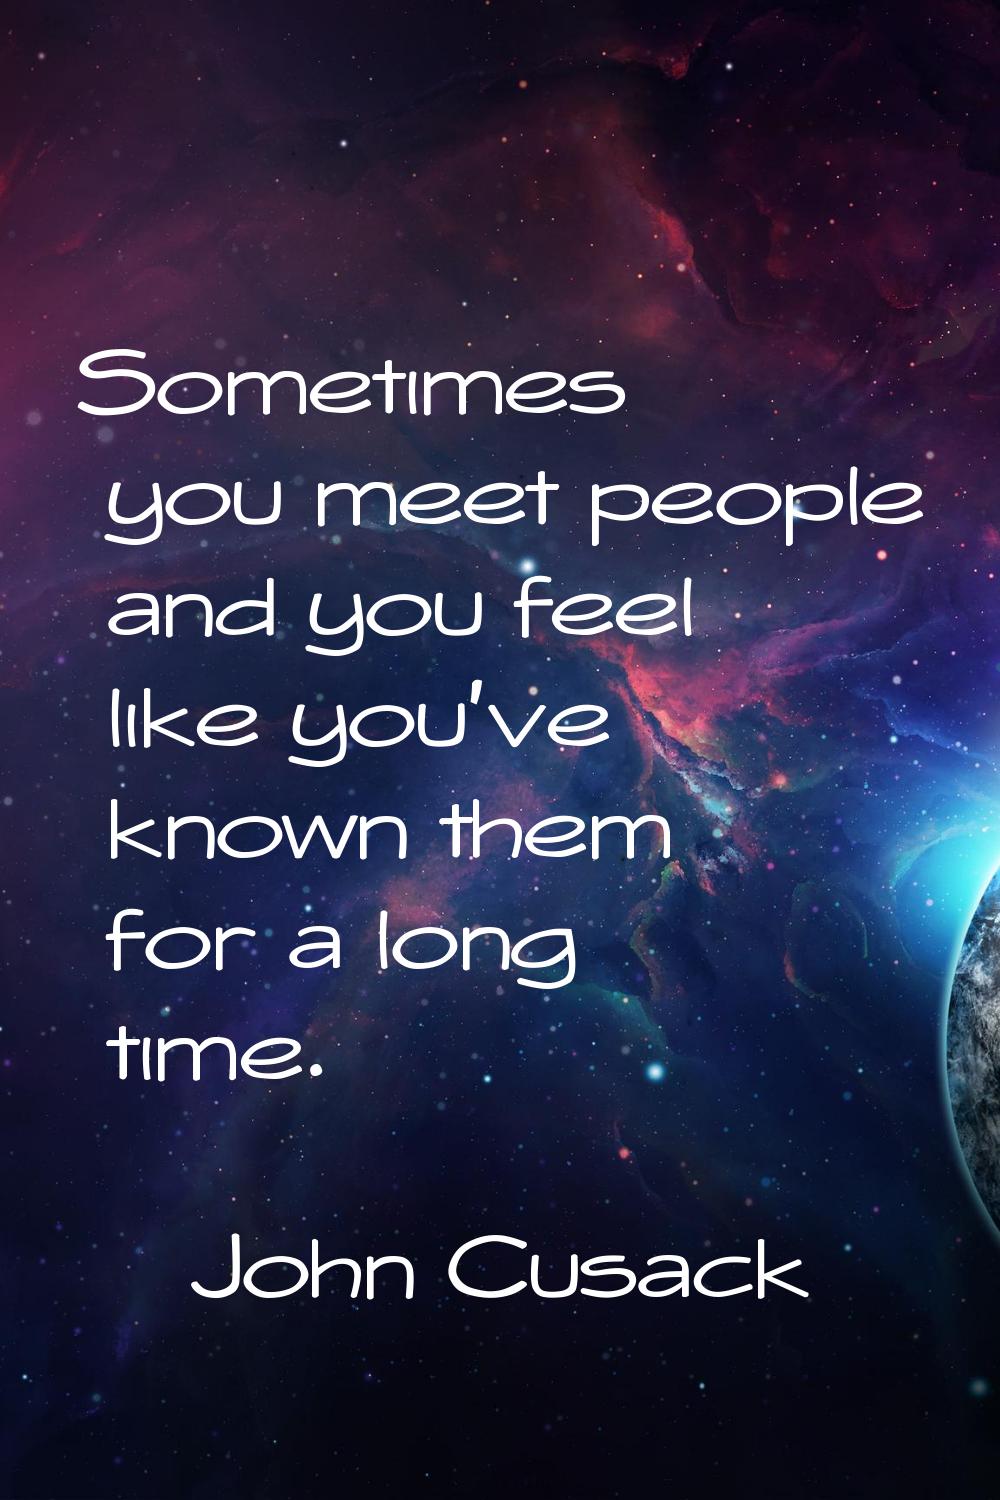 Sometimes you meet people and you feel like you've known them for a long time.